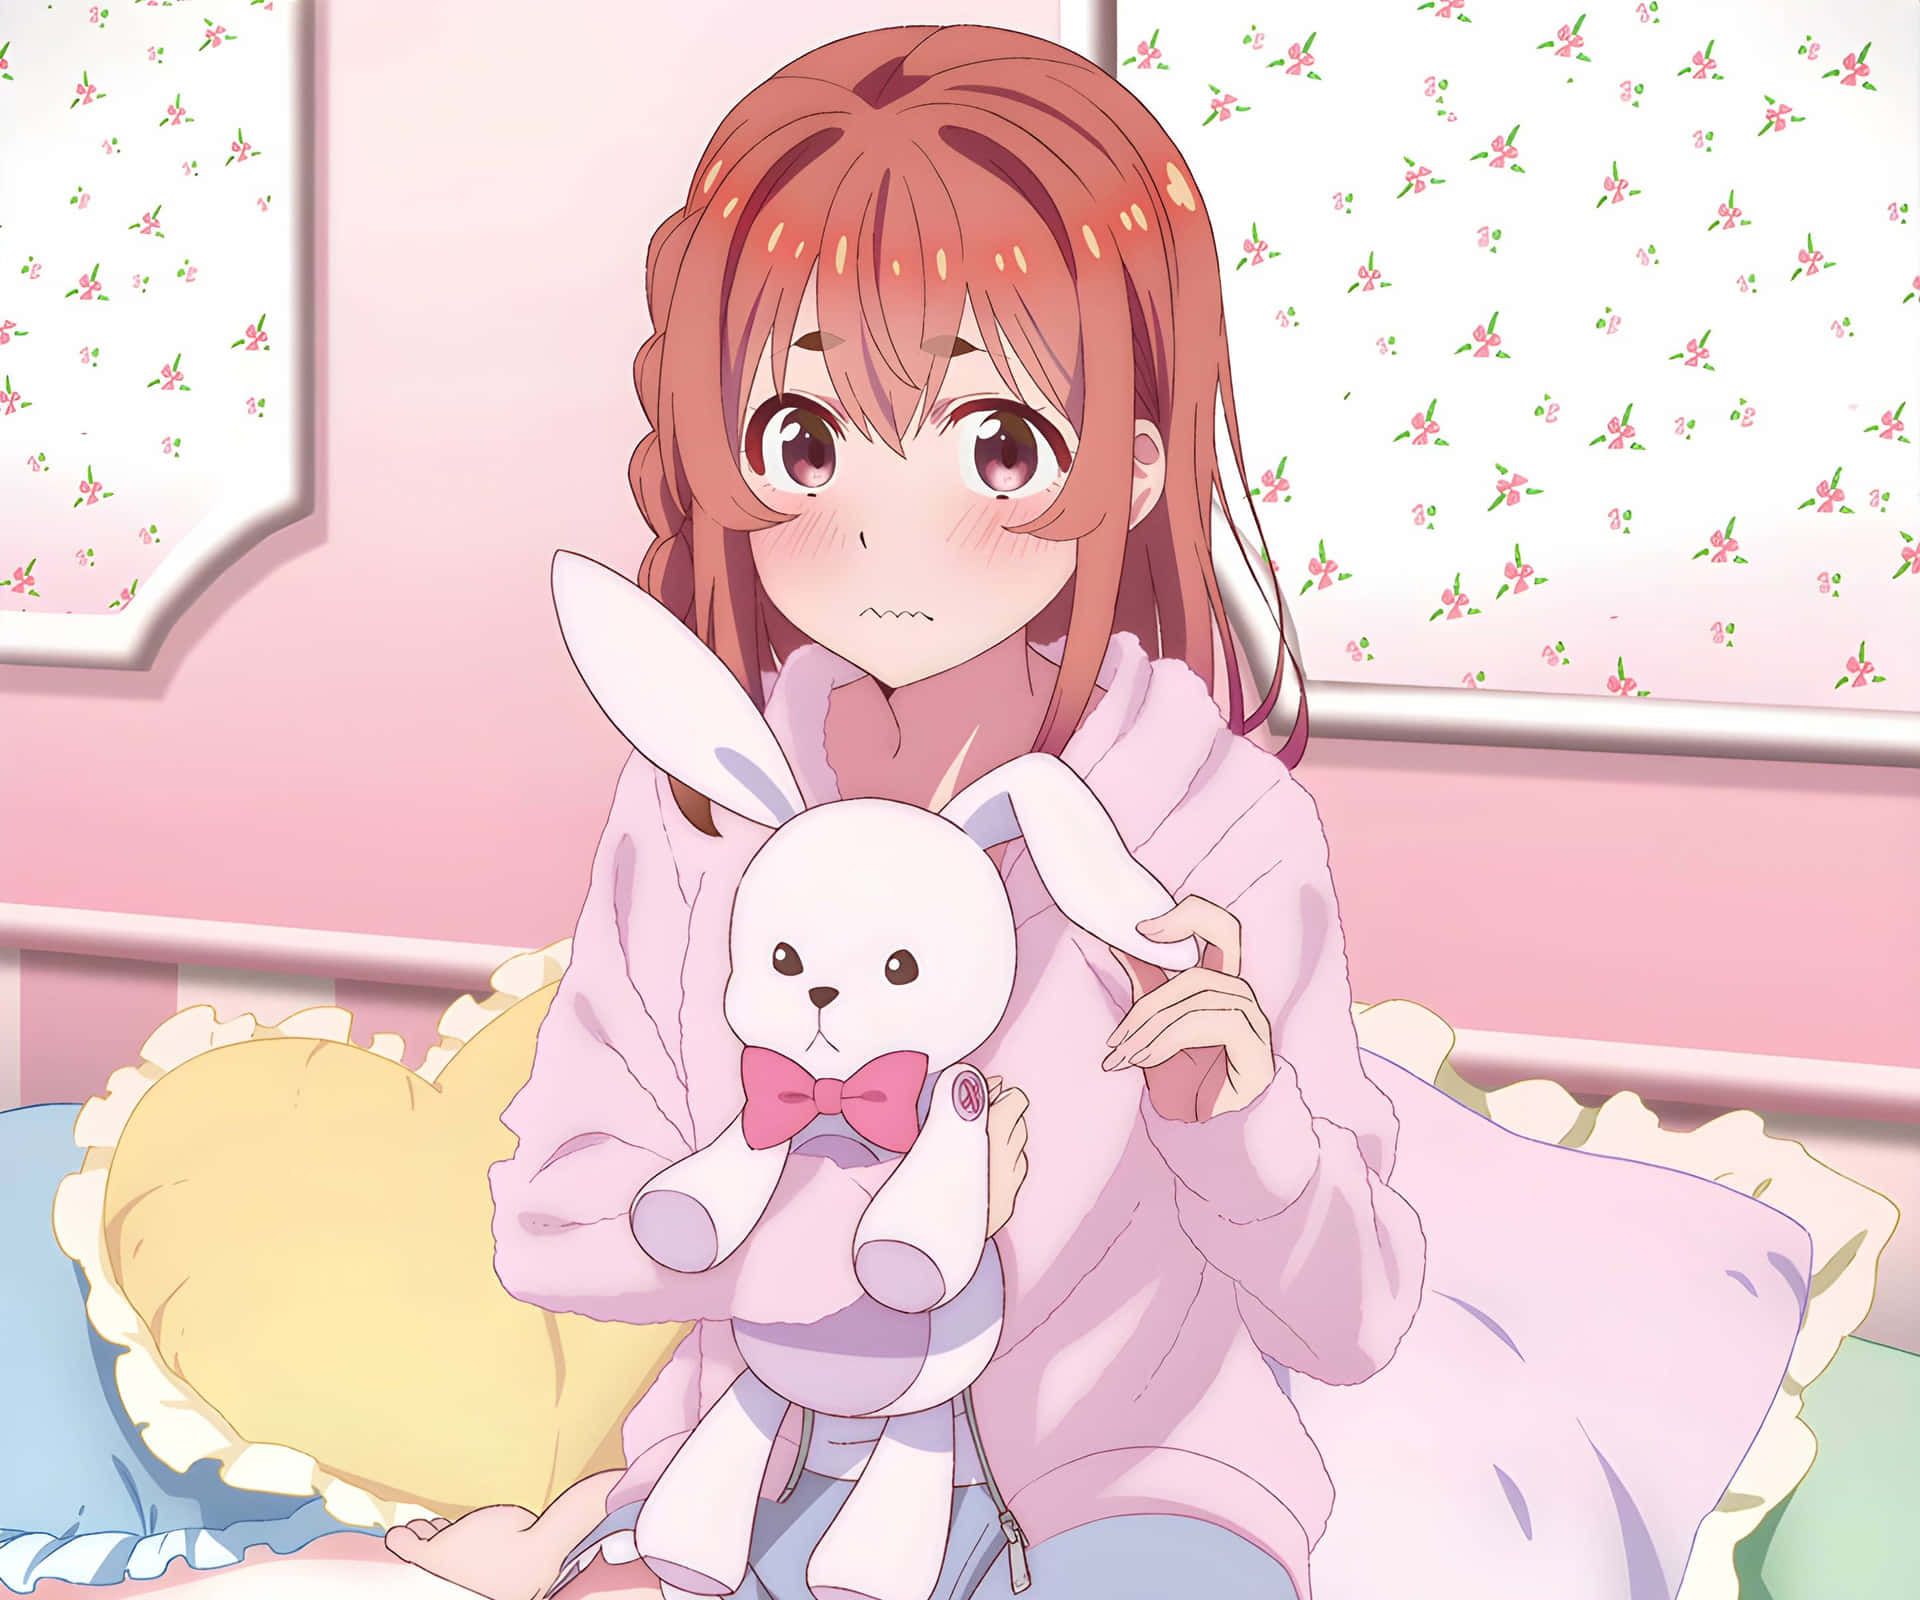 Blushing Sumi With A Bunny Toy Wallpaper